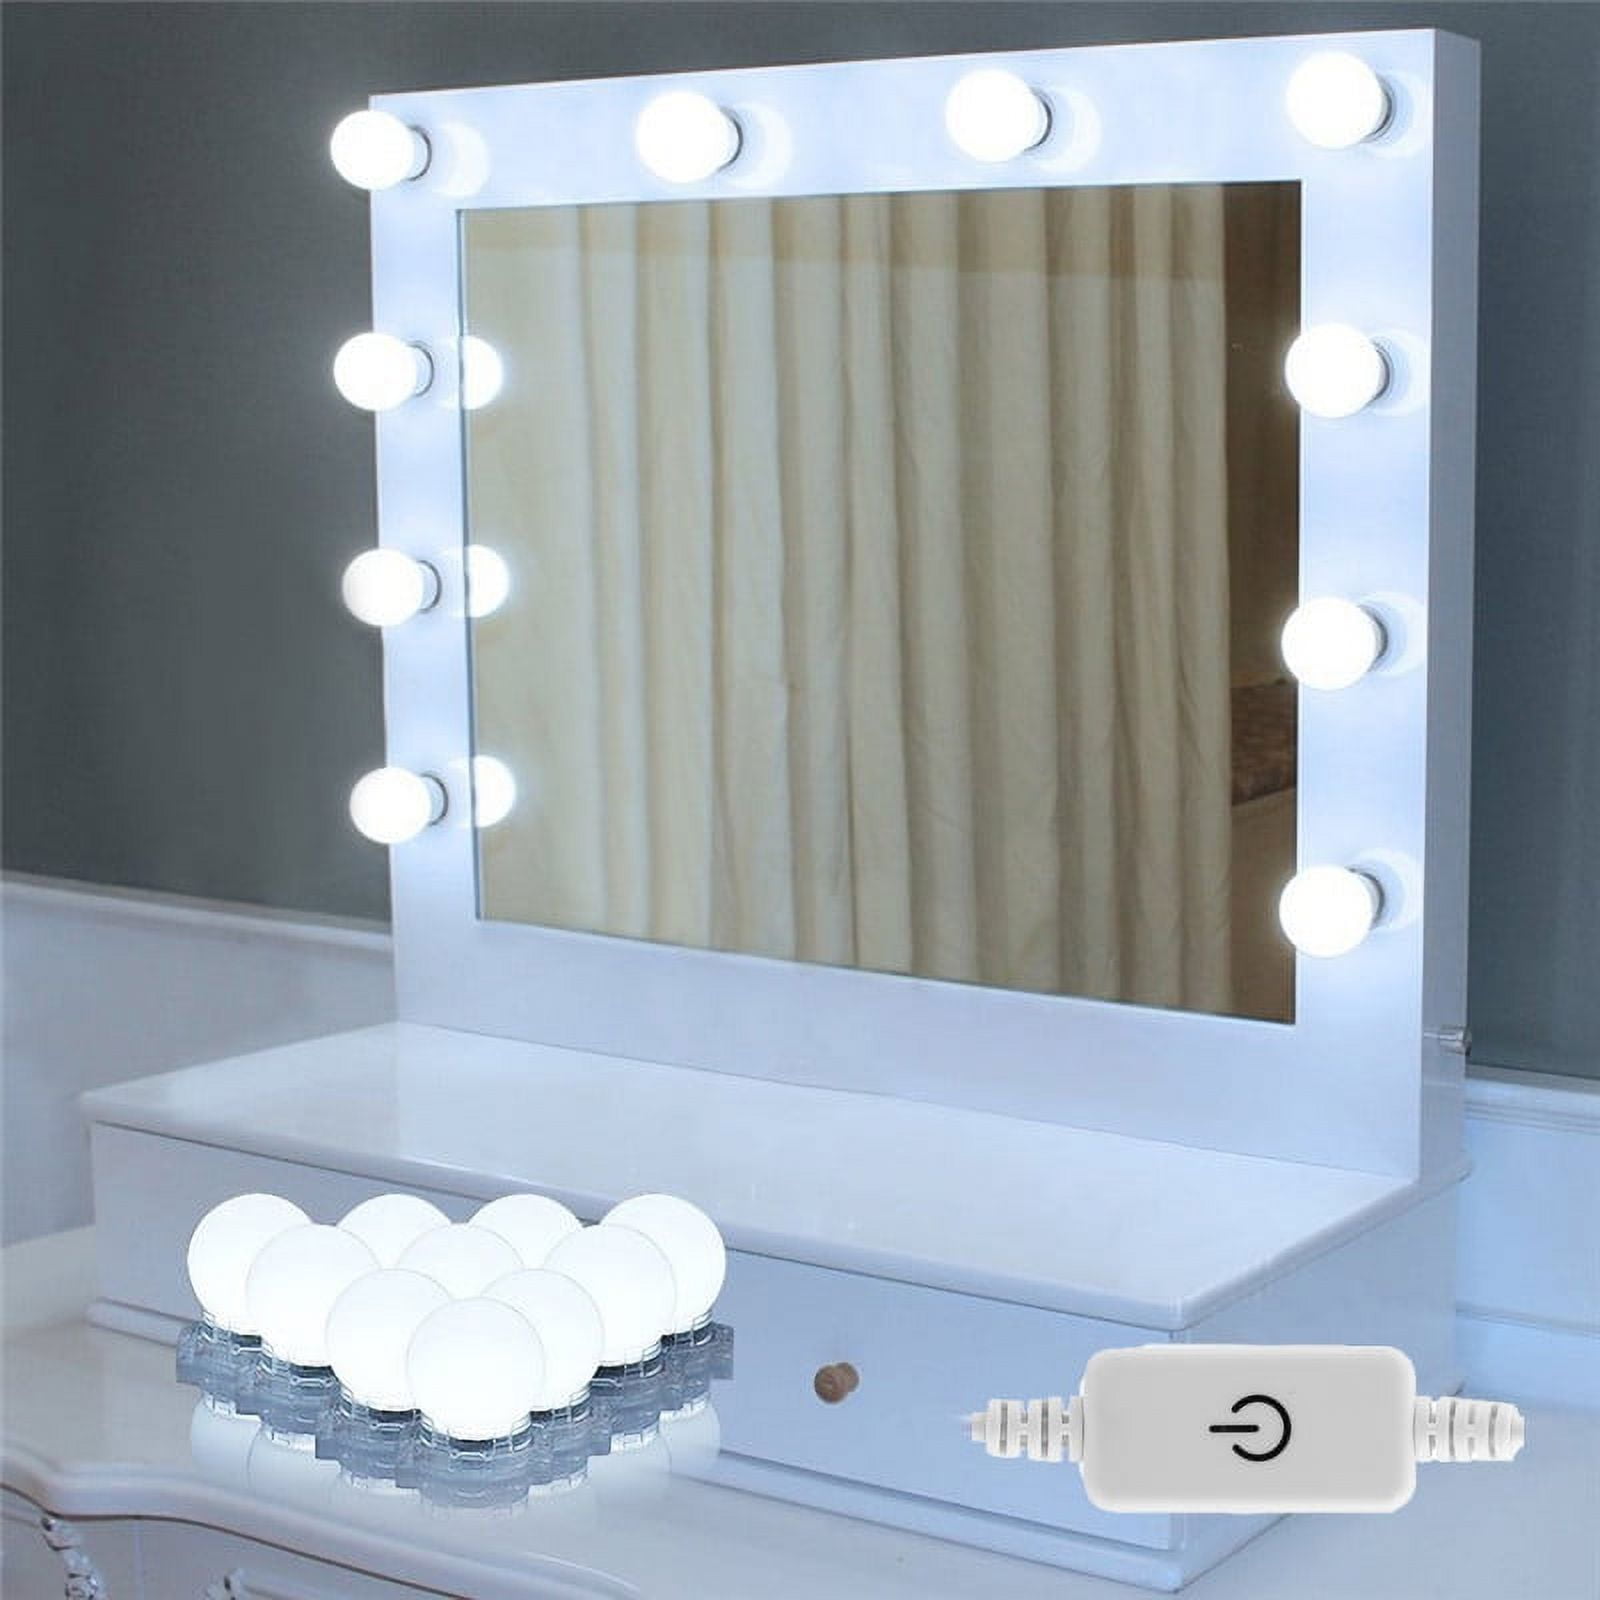 Brightown Upgraded Hollywood Style Vanity Mirror Lights Kit, 10 Dimmable LED Bulbs with 3 Color Modes, Best for Makeup Dressing Table B